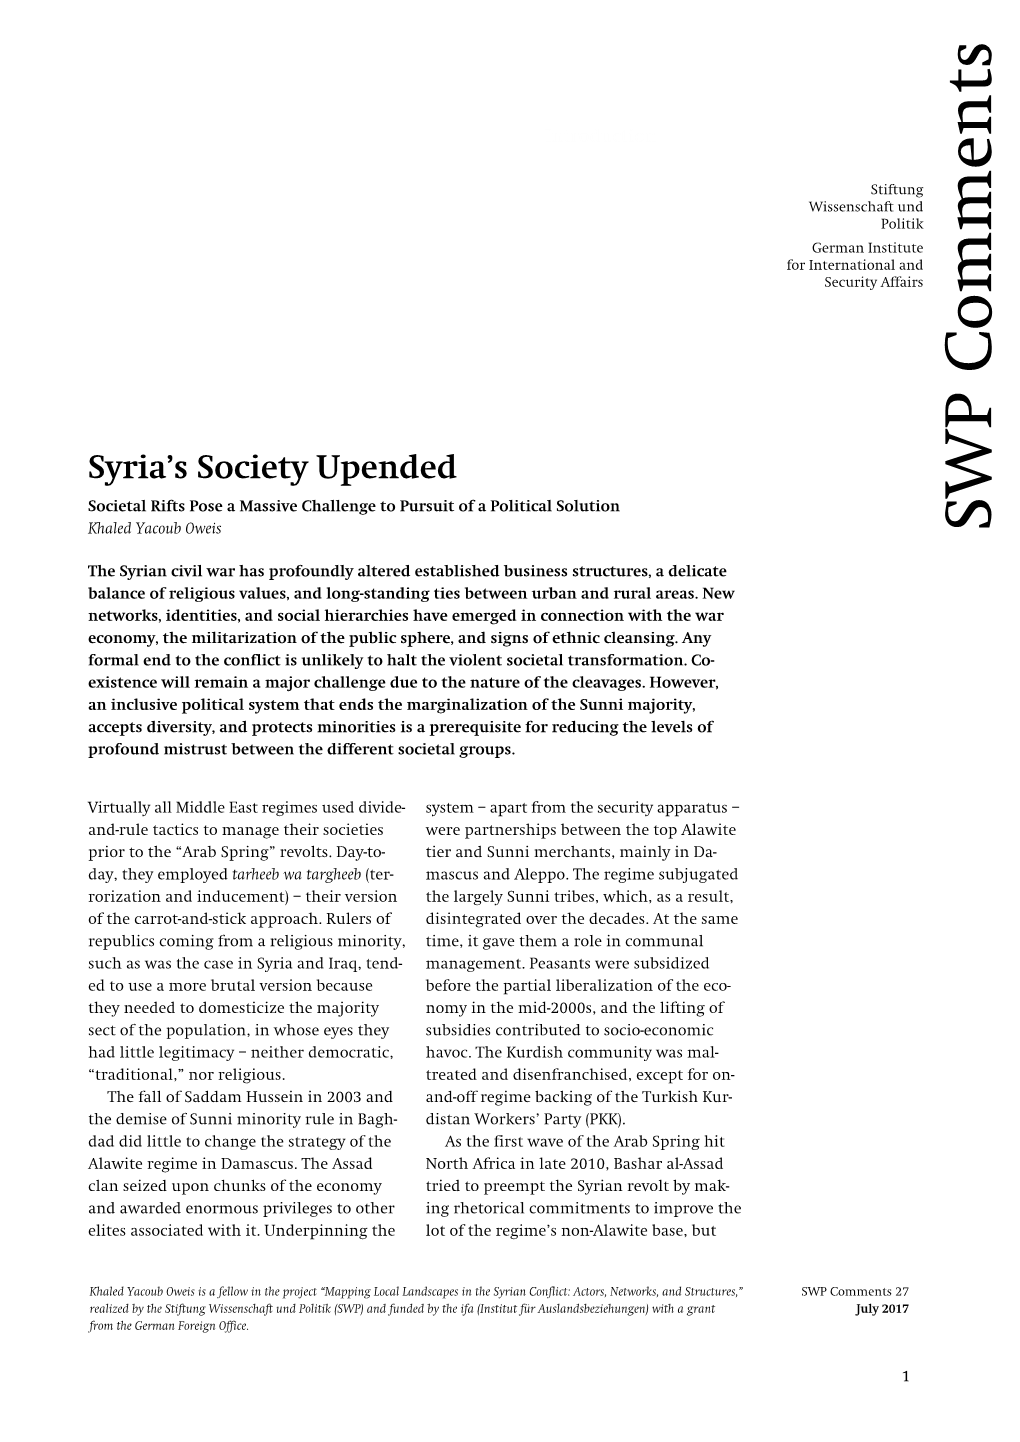 Syria's Society Upended. Societal Rifts Pose a Massive Challenge to Pursuit of a Political Solution